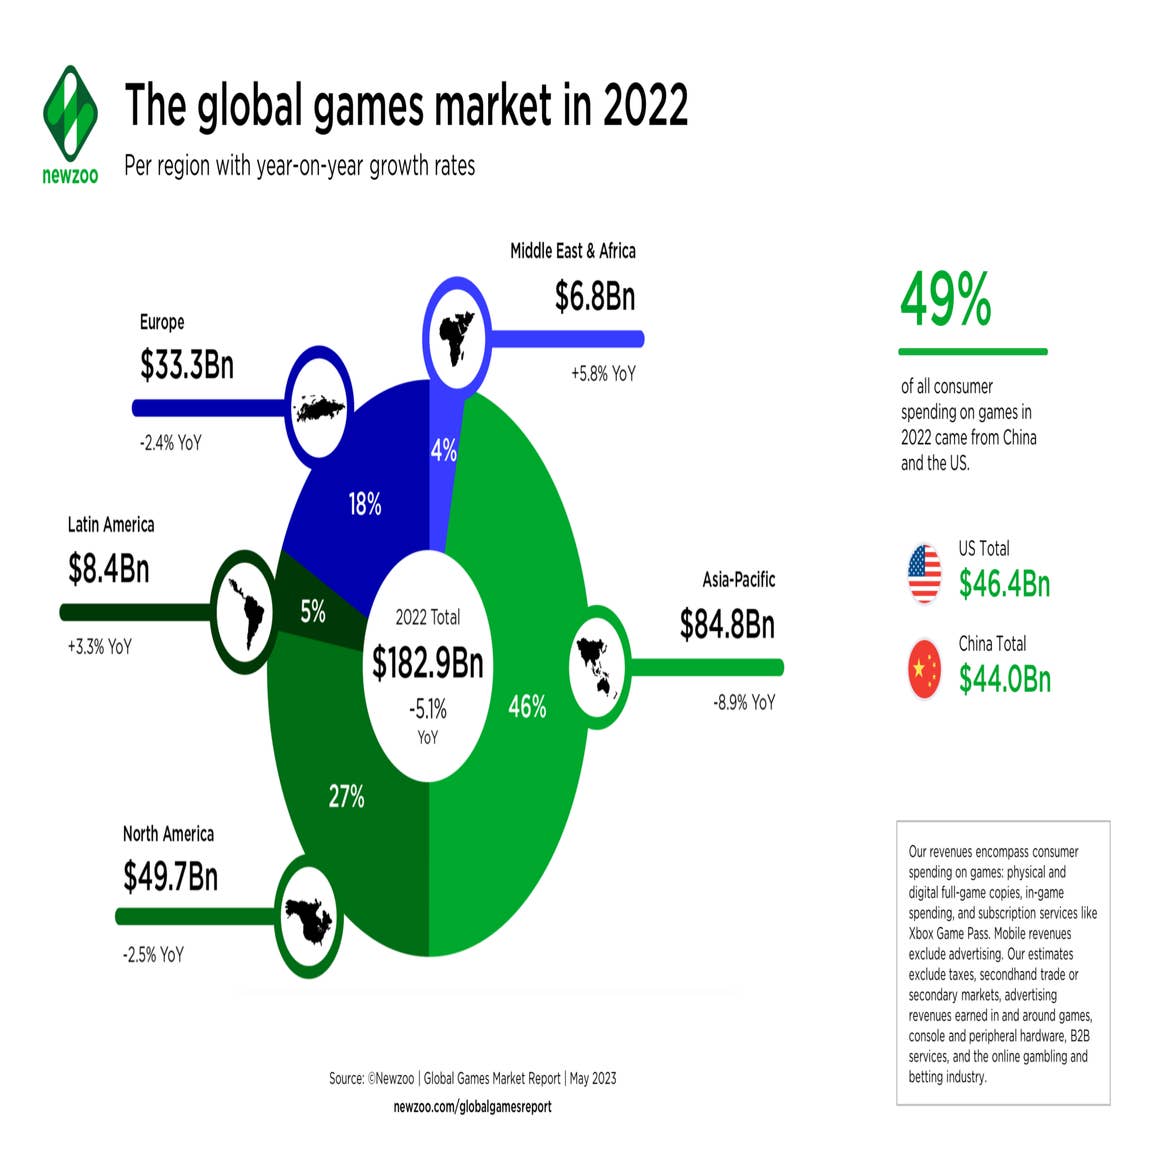 Free to play games rule the entertainment world with $88 billion in revenue